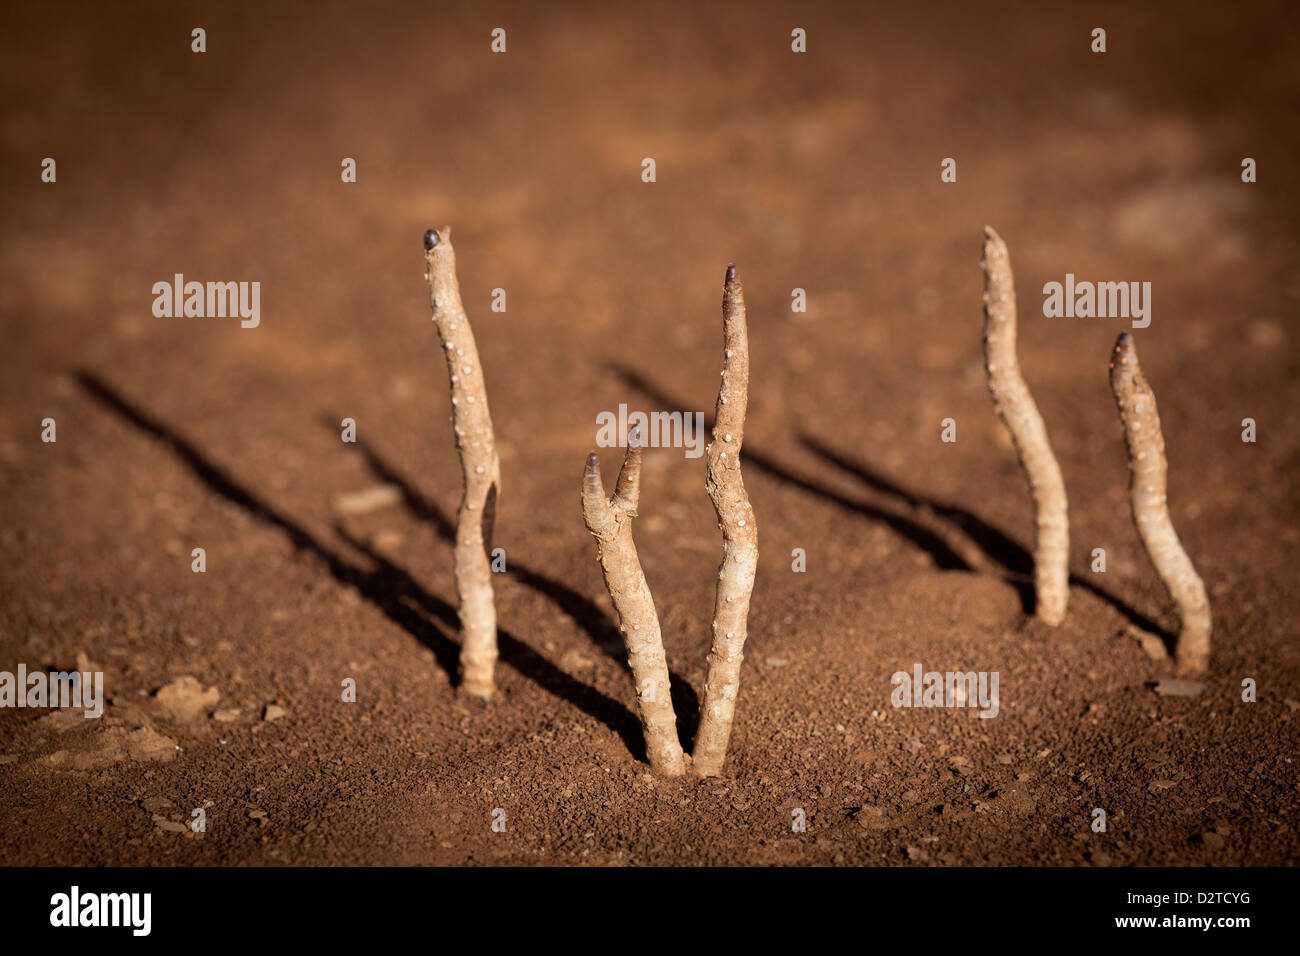 Small plants in the dry soil of Sarigua national park (desert), Herrera province, Republic of Panama. Stock Photo